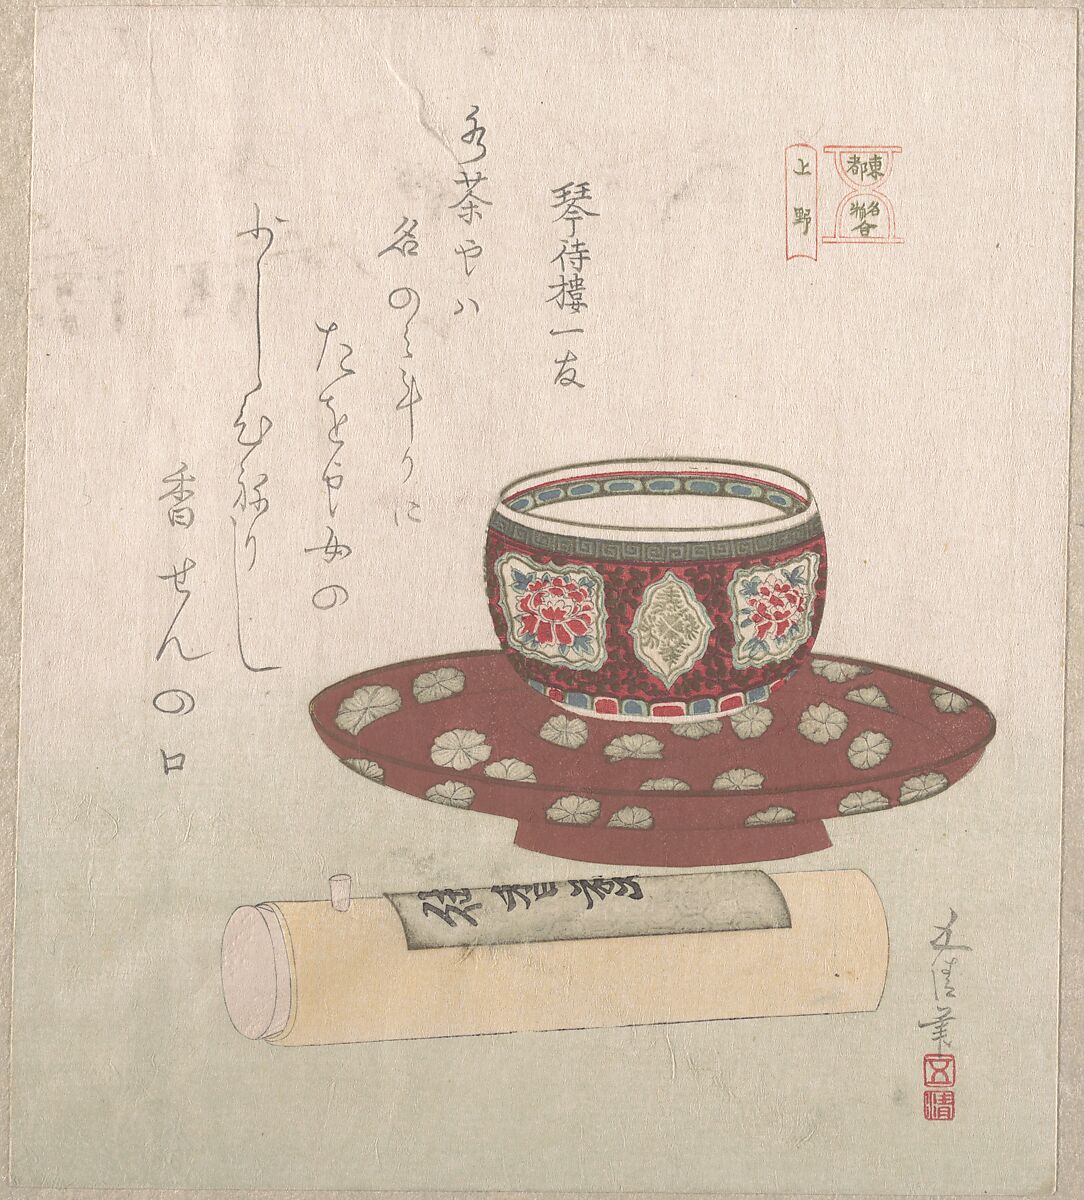 Teabowl and Powder Cake in a Tube, Sunayama Gosei (Japanese, 18th–19th century), Part of an album of woodblock prints (surimono); ink and color on paper, Japan 